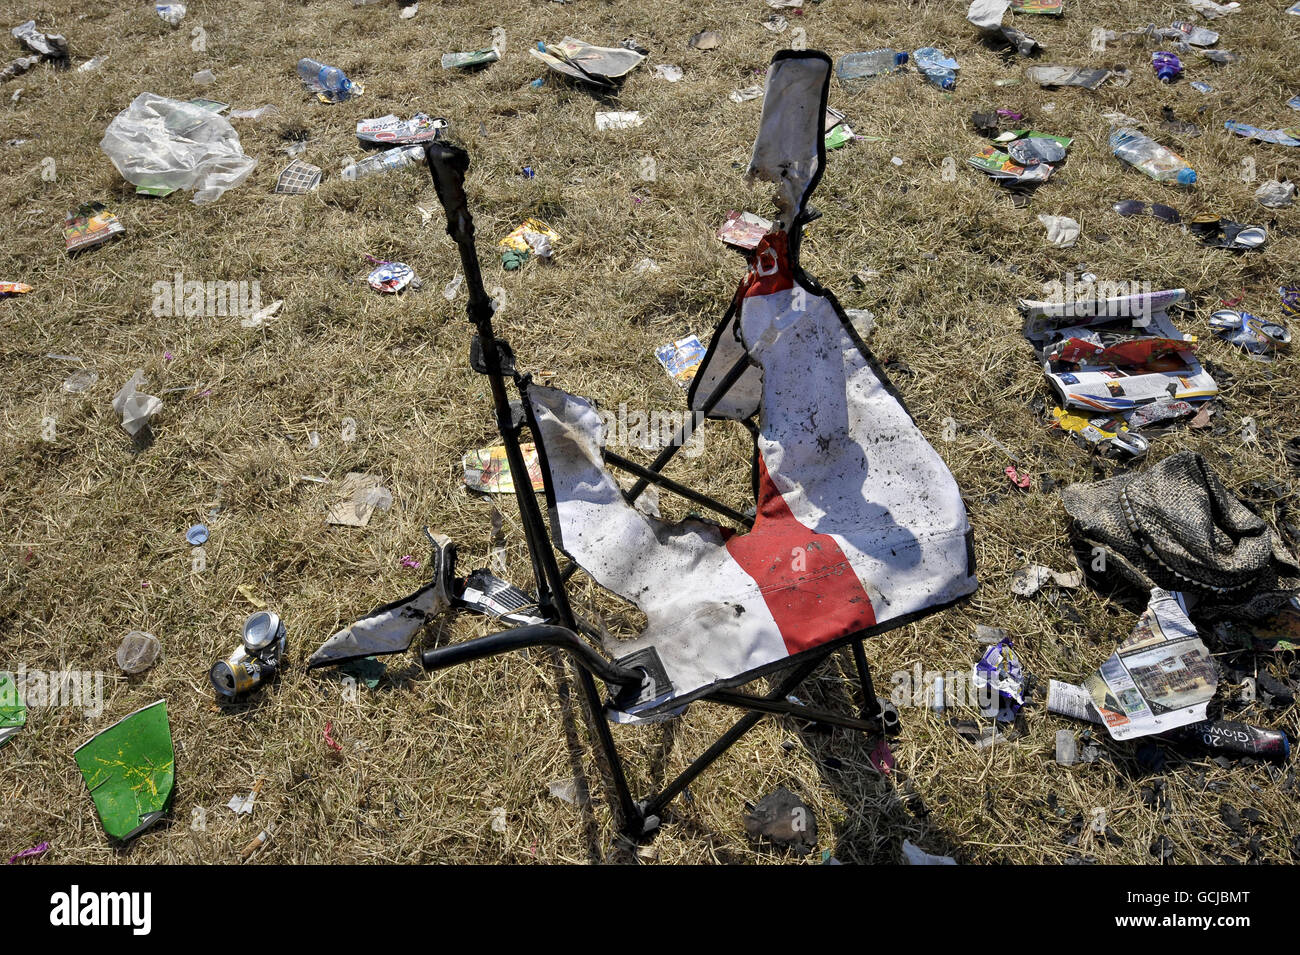 A burnt camping chair left behind as the clean-up operation begins after the Glastonbury Festival at Worthy farm, Somerset. Stock Photo